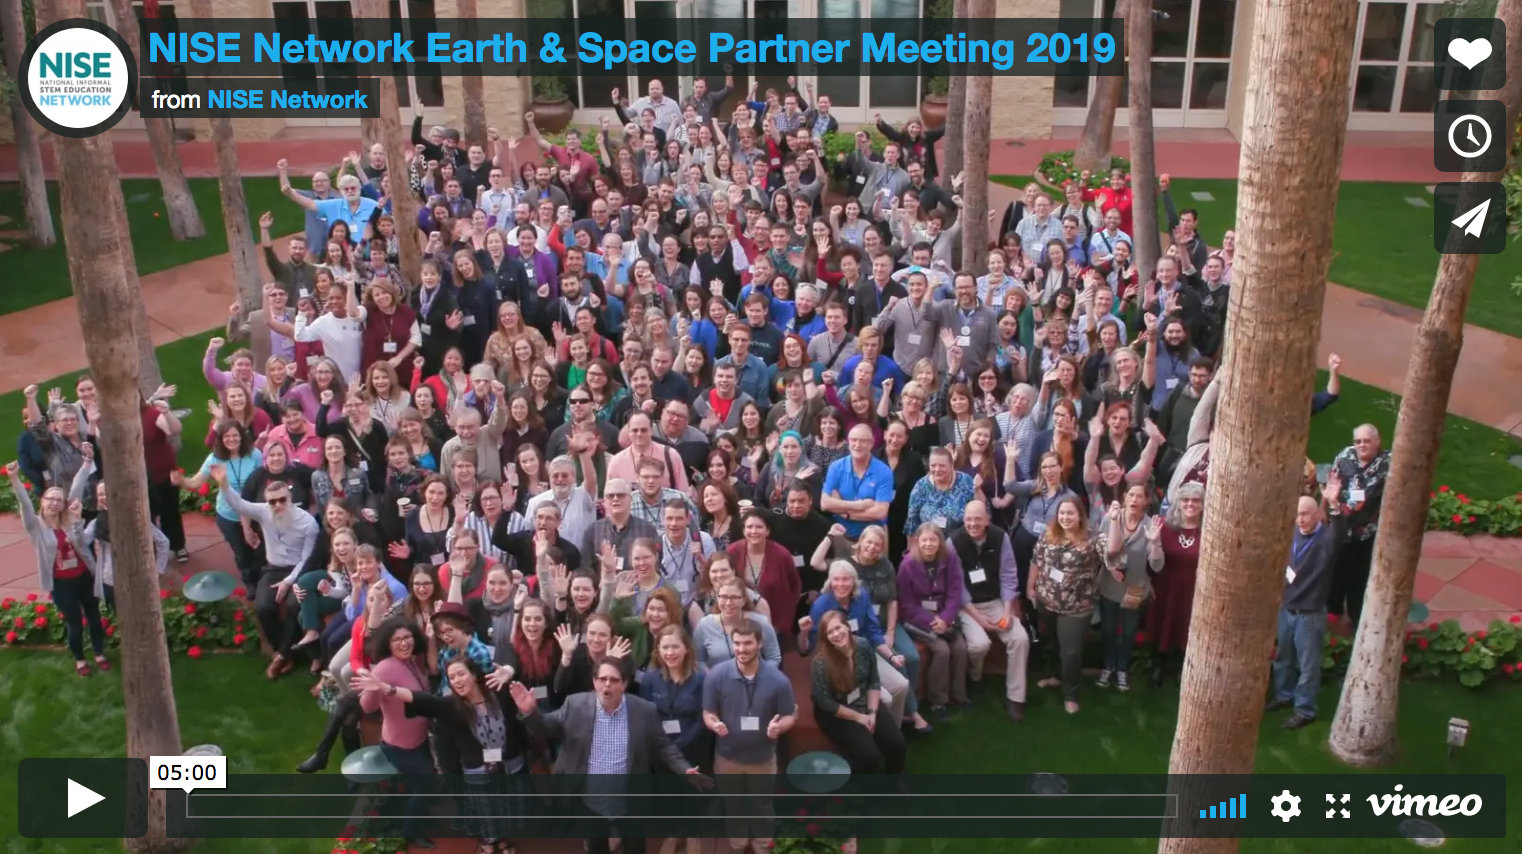 NISE Network Earth & Space Partner Meeting 2019